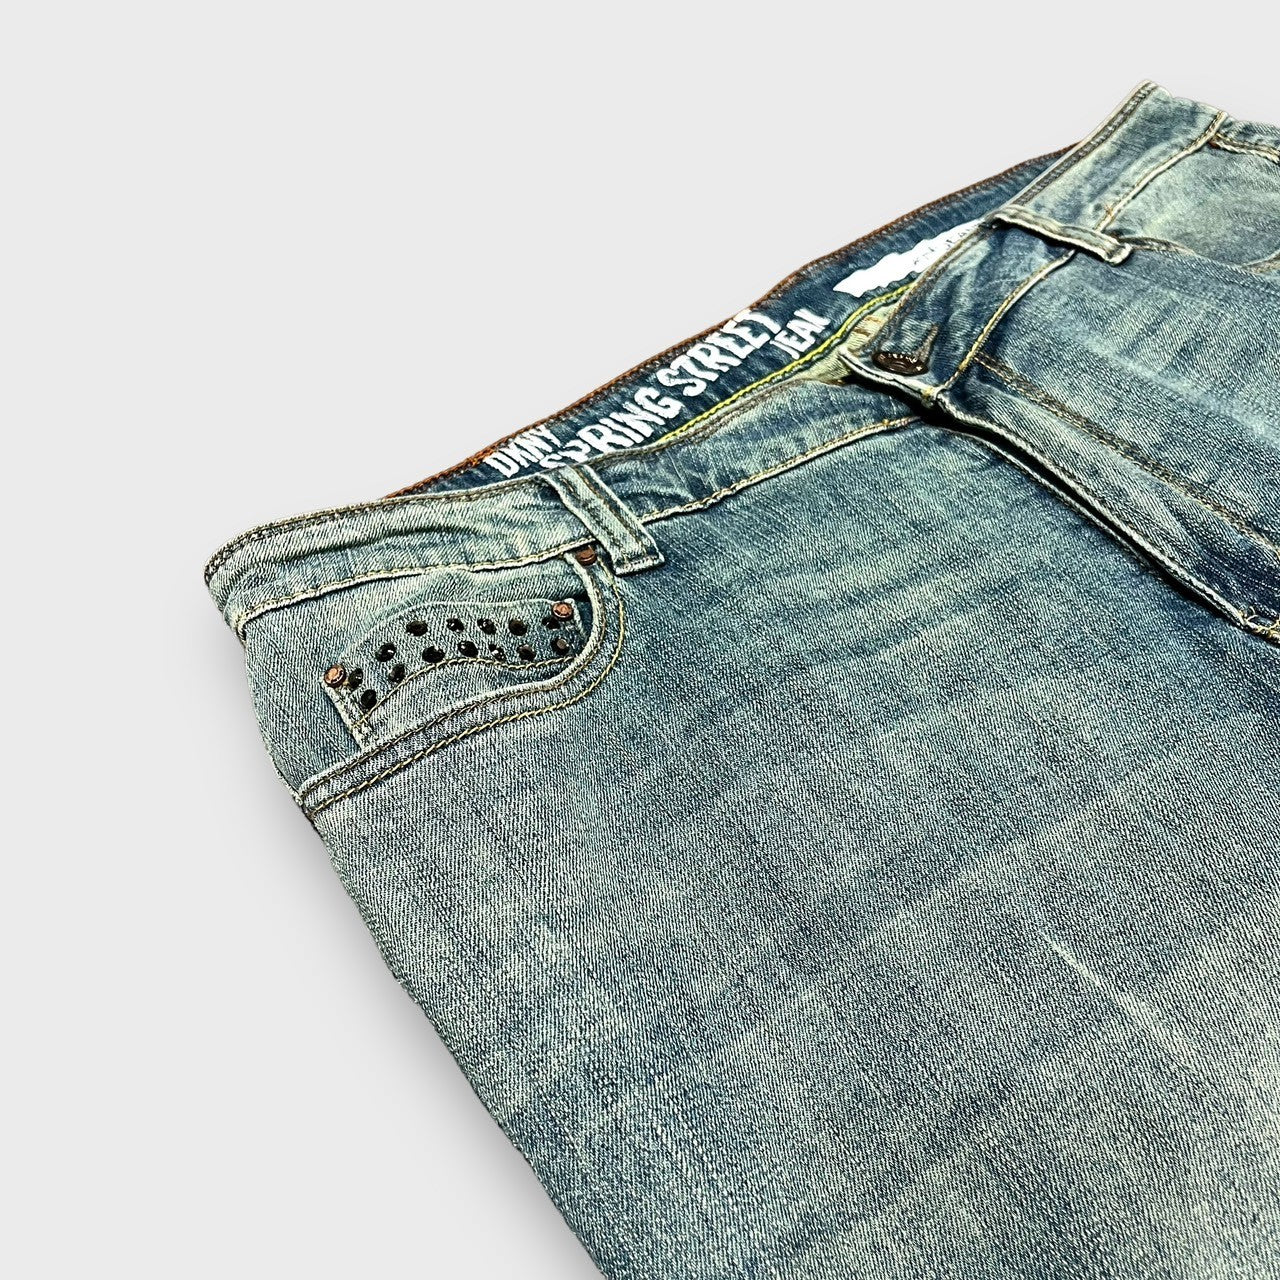 00’s DKNY JEANS buggy flare denim